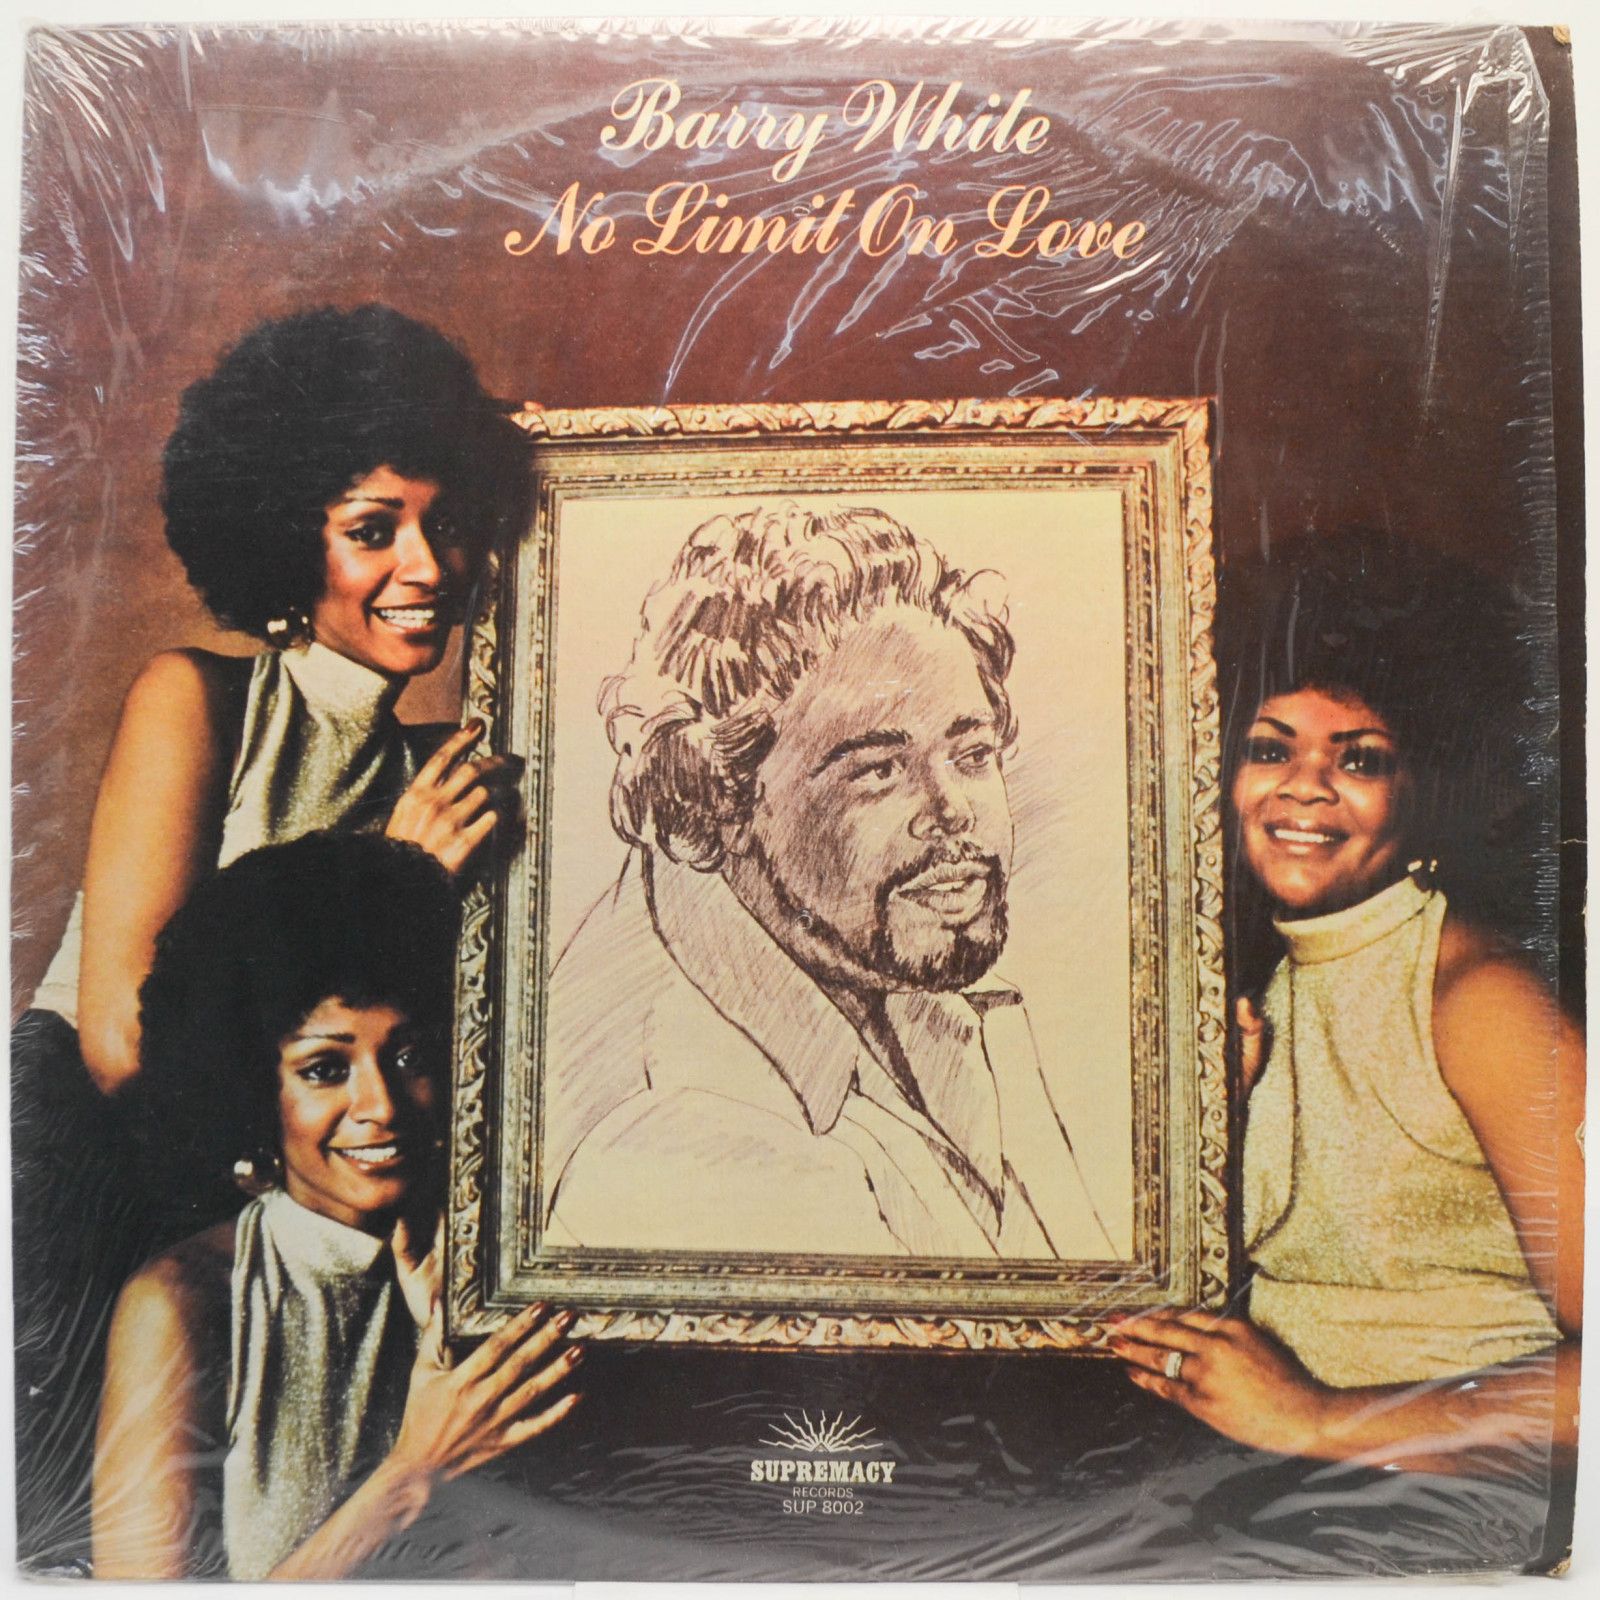 Barry White — No Limit On Love (1-st, USA), 1974